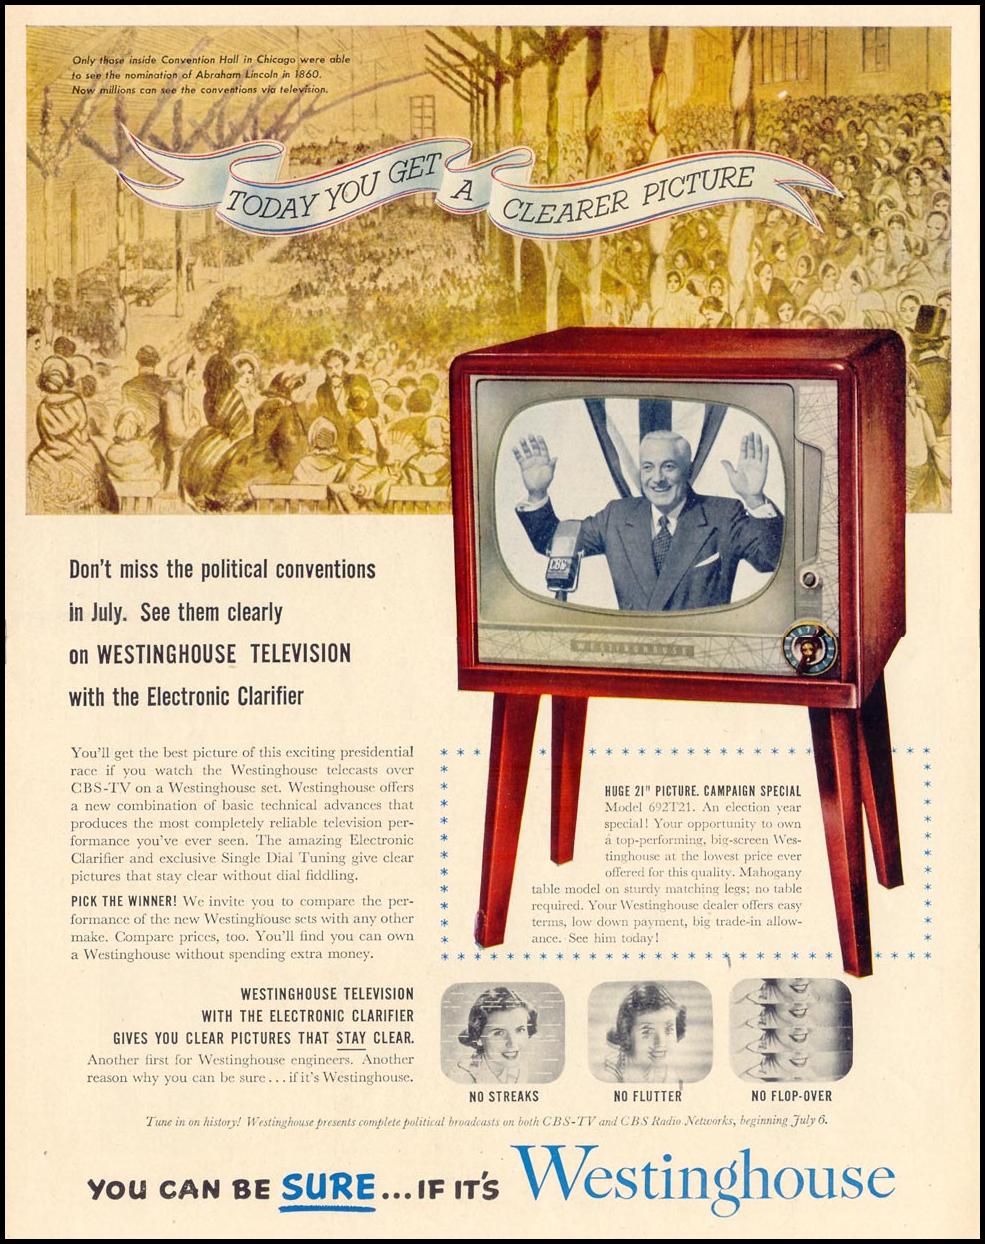 WESTINGHOUSE TELEVISIONS
LIFE
06/16/1952
p. 90